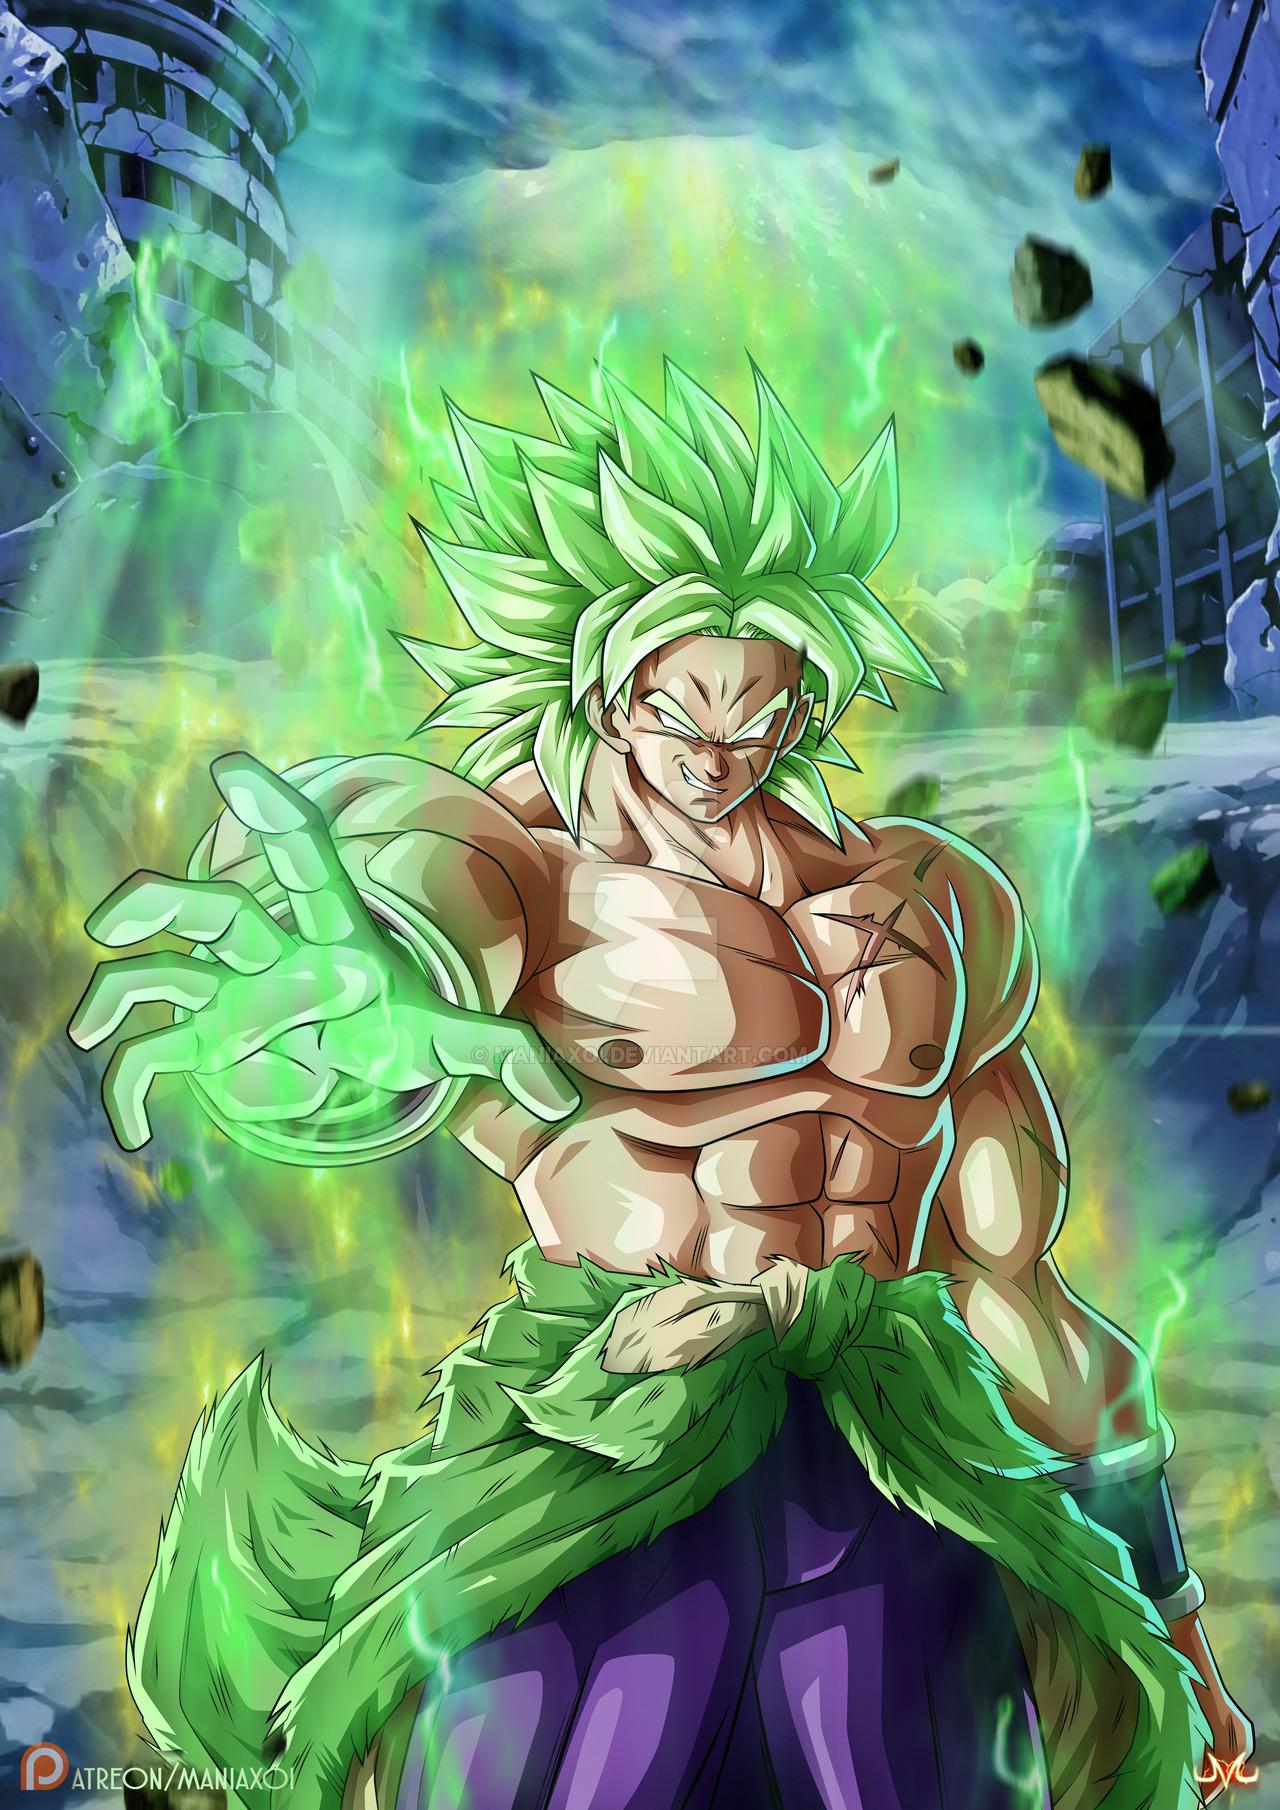 Broly [1280x1810] + live wallpaper in comments